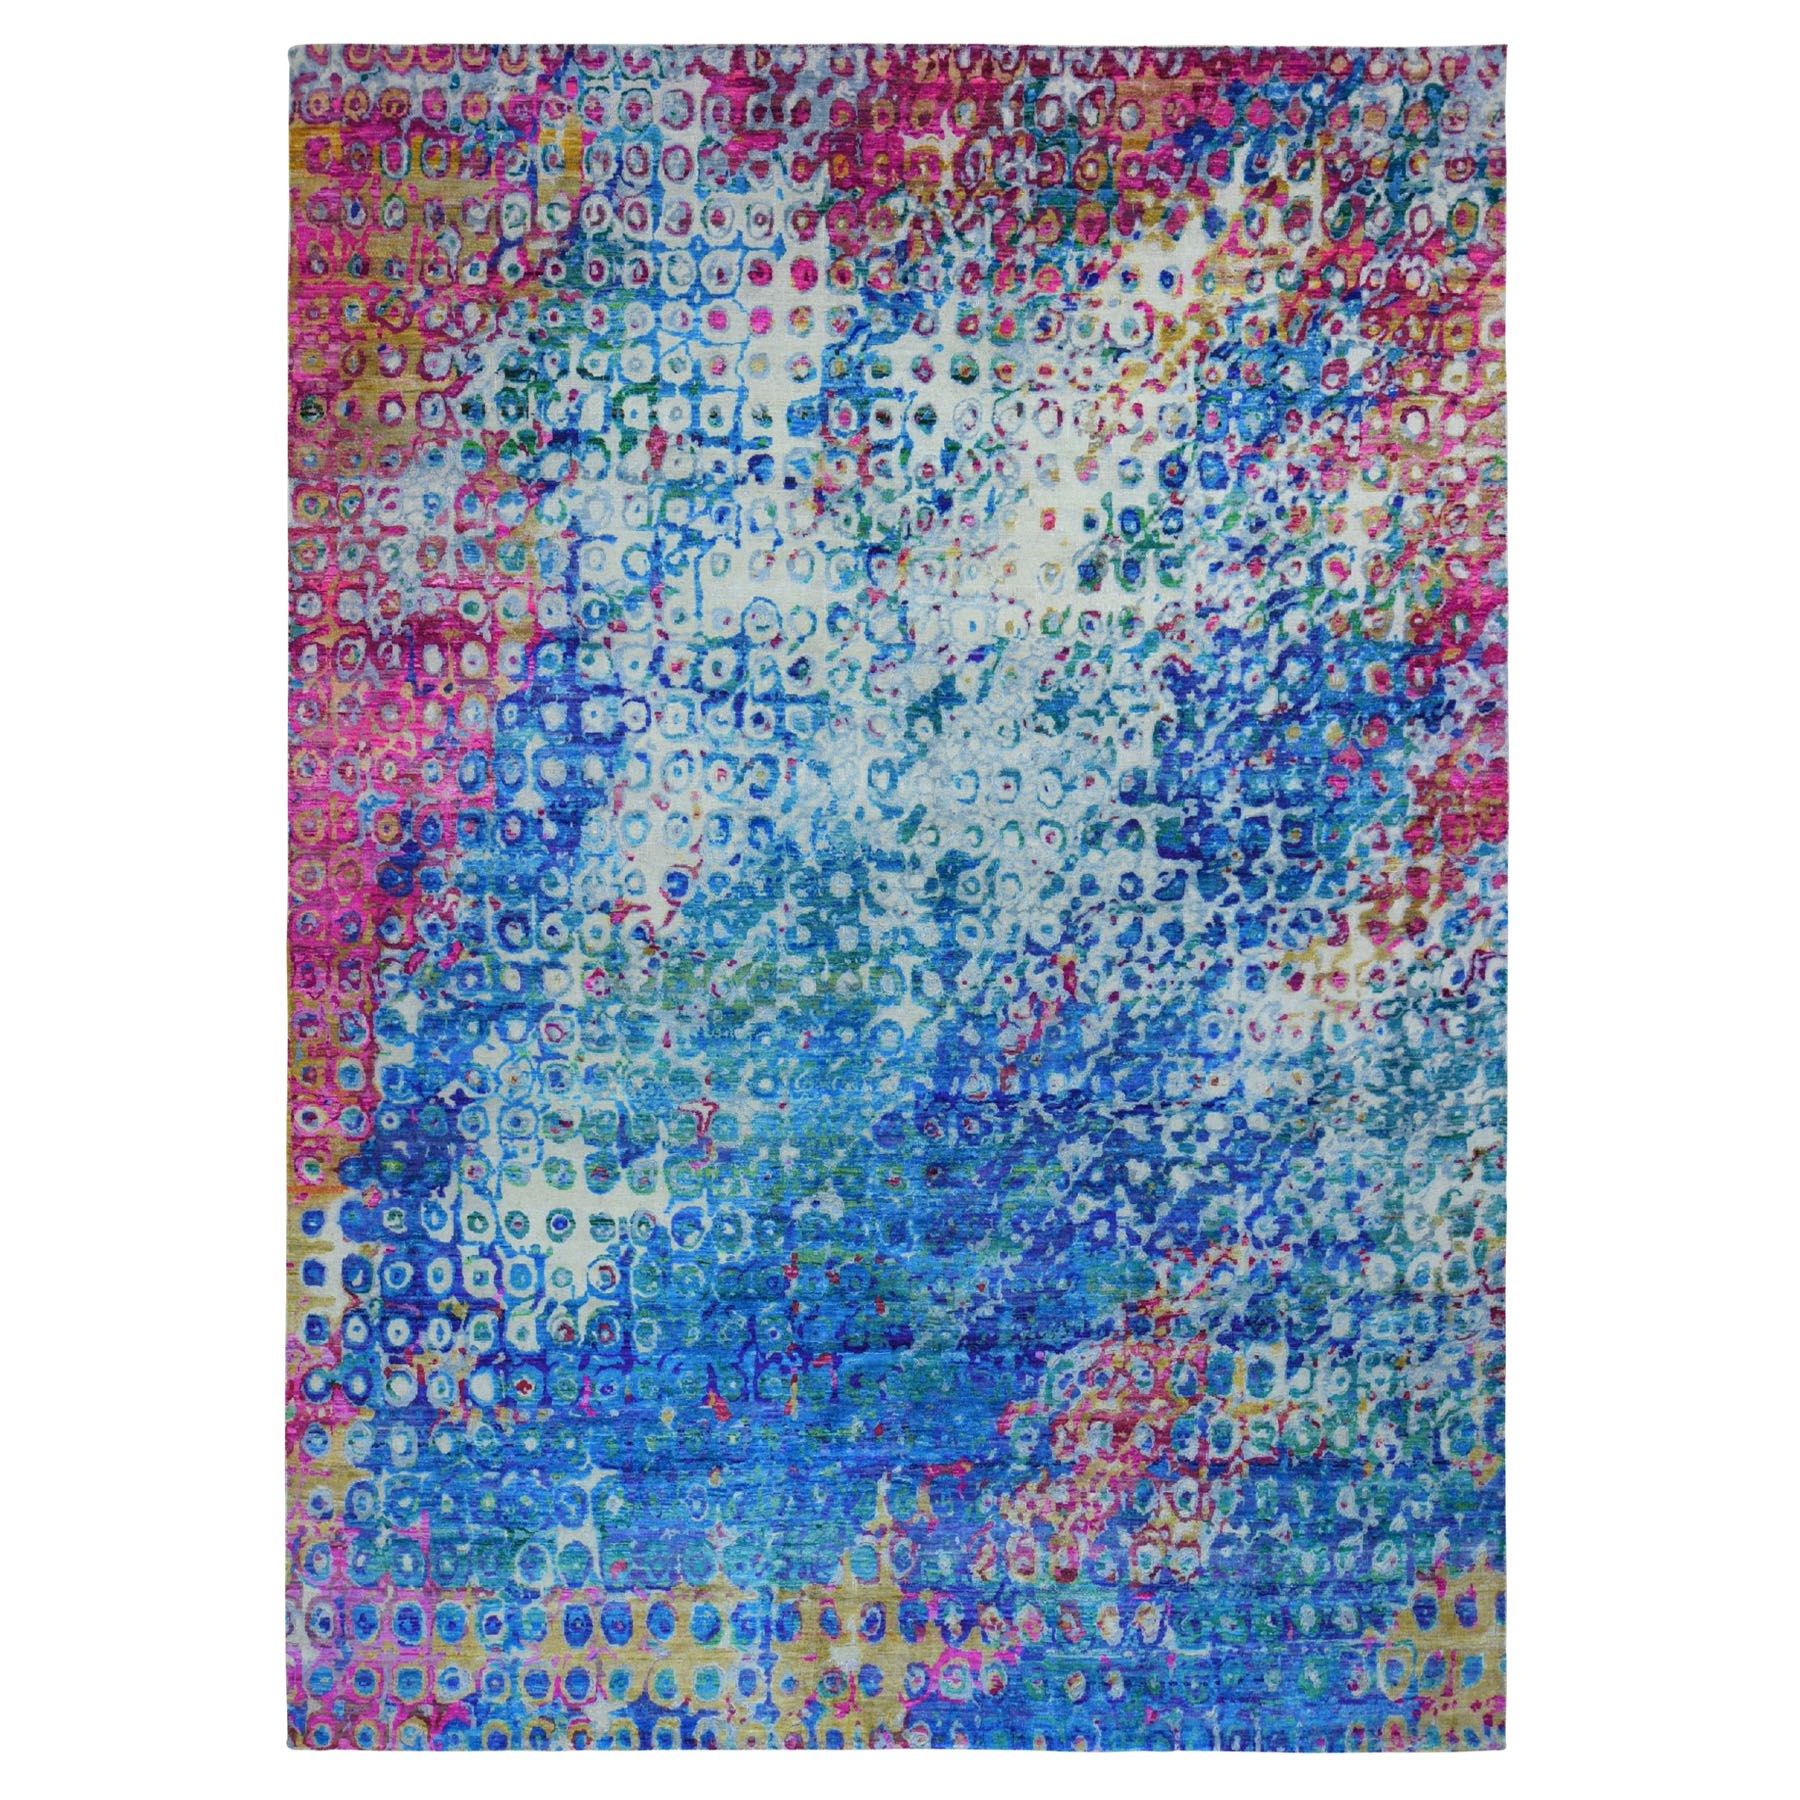 10-x13-9  THE PEACOCK, Sari Silk Colorful Hand Knotted Oriental Rug 